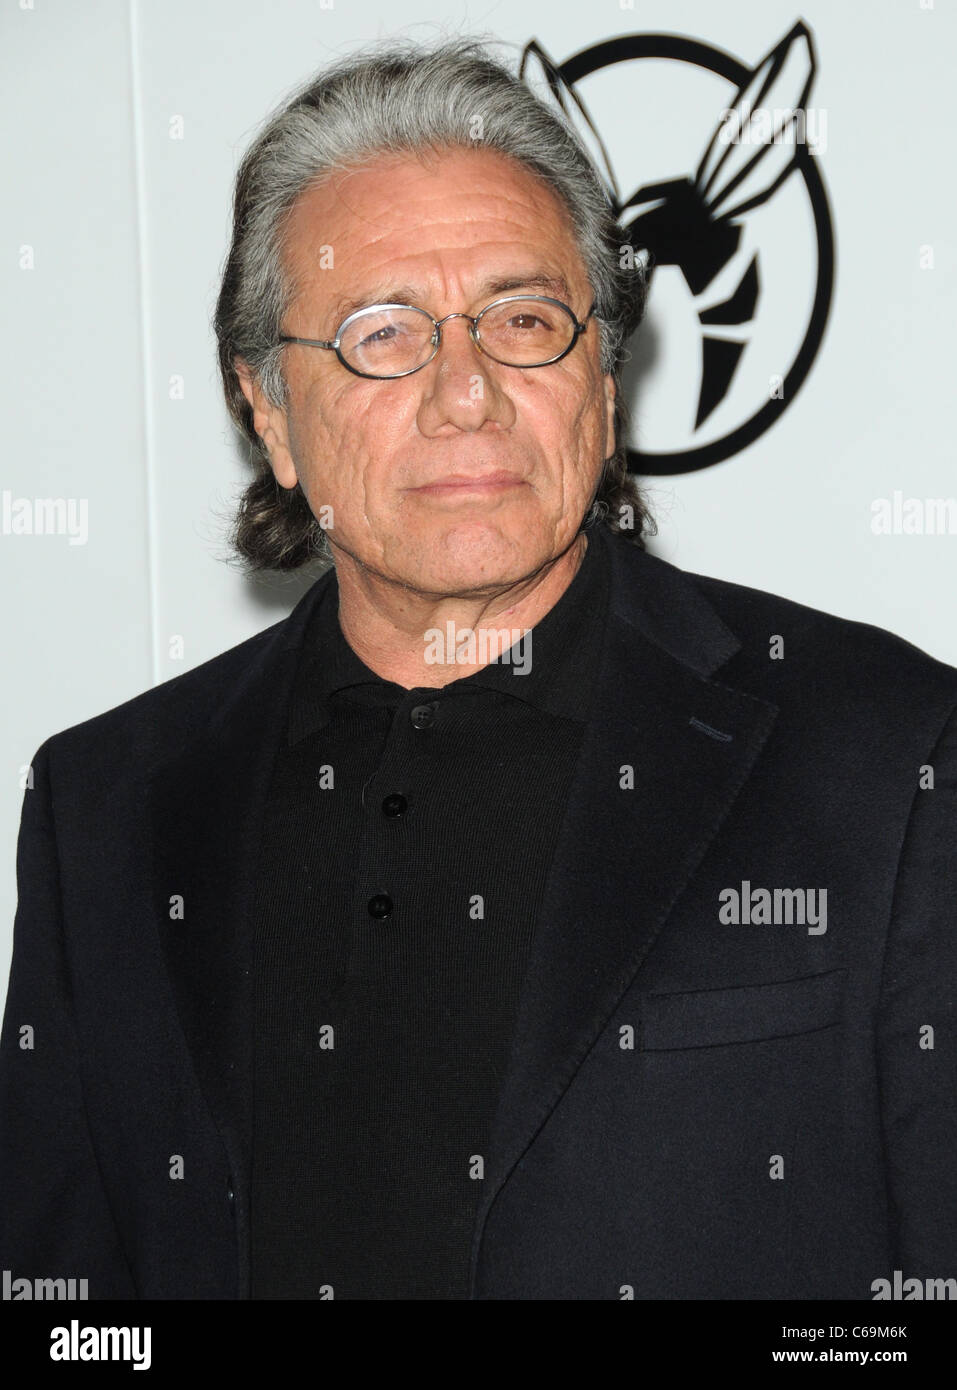 Edward James Olmos at arrivals for THE GREEN HORNET Premiere, Grauman's Chinese Theatre, Los Angeles, CA January 10, 2011. Photo By: Dee Cercone/Everett Collection Stock Photo